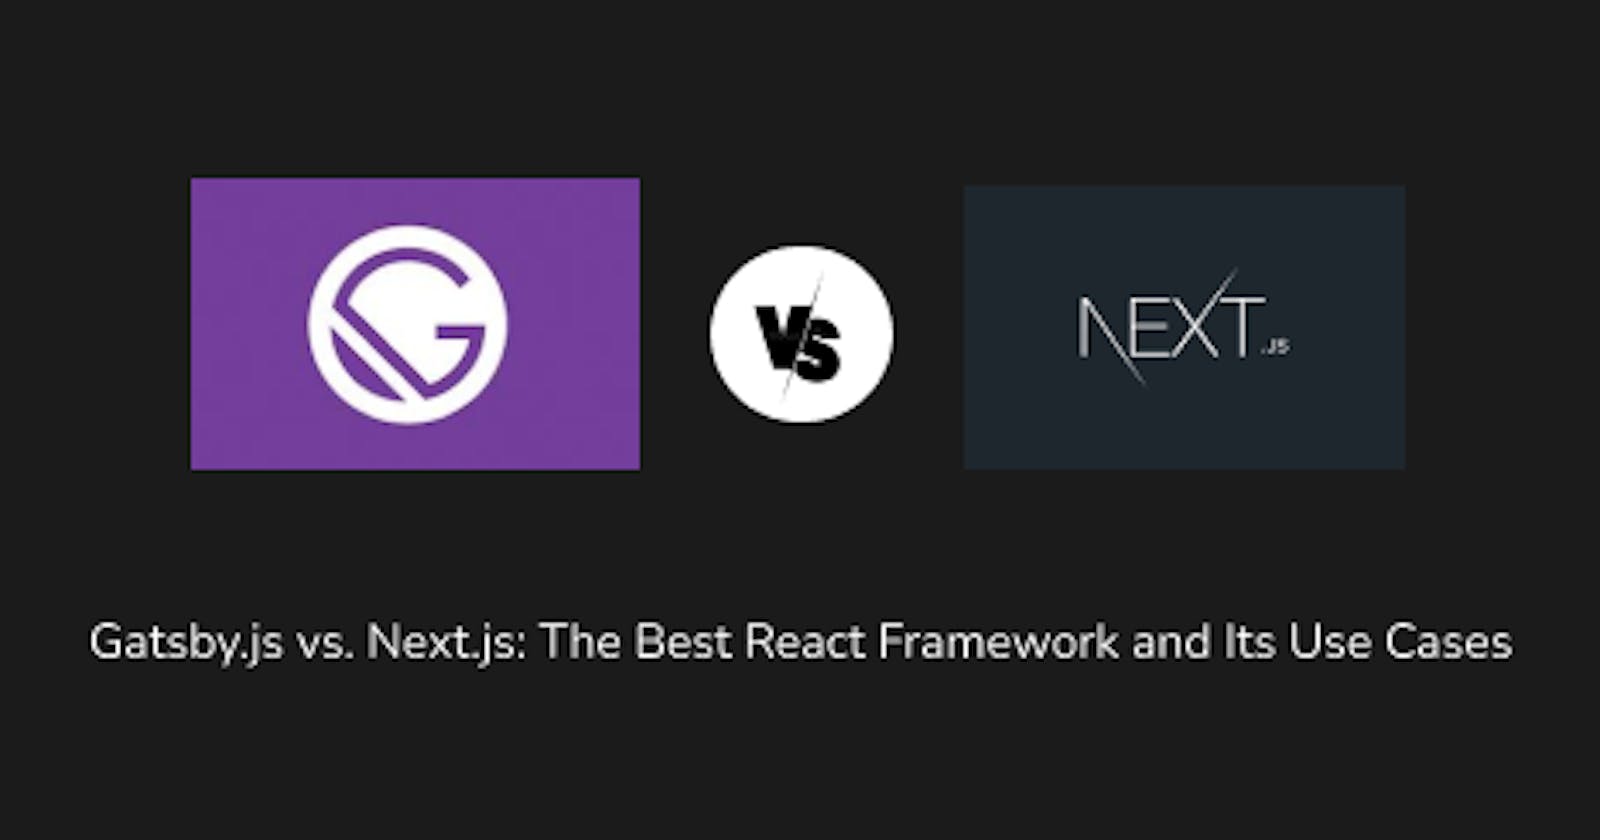 Gatsby.js vs. Next.js: The Best React Framework and Its Use Cases